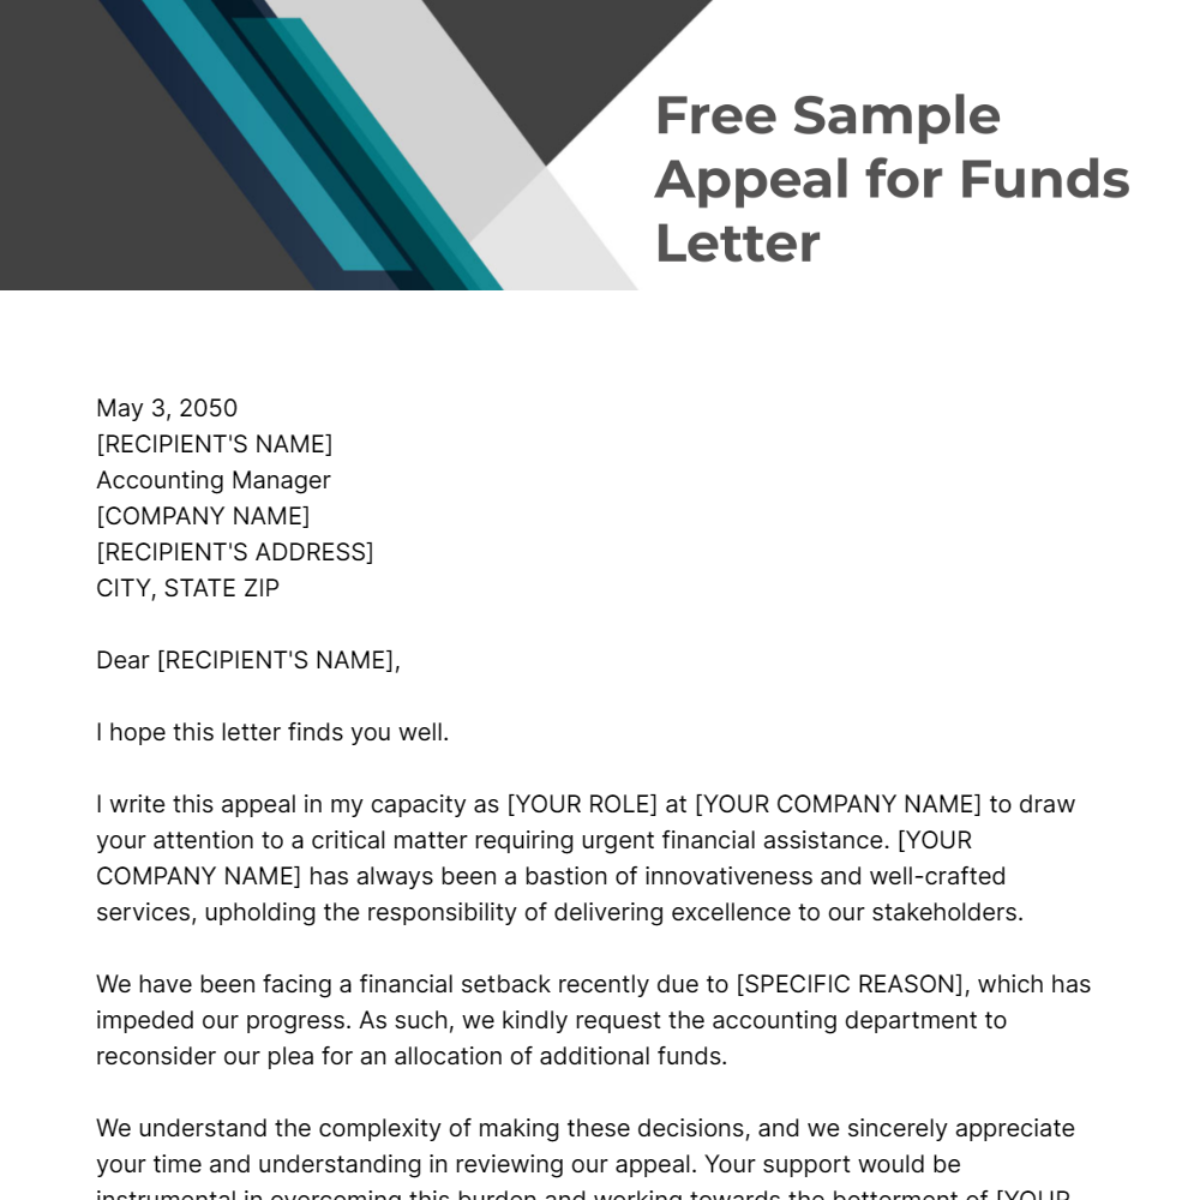 Sample Appeal for Funds Letter Template